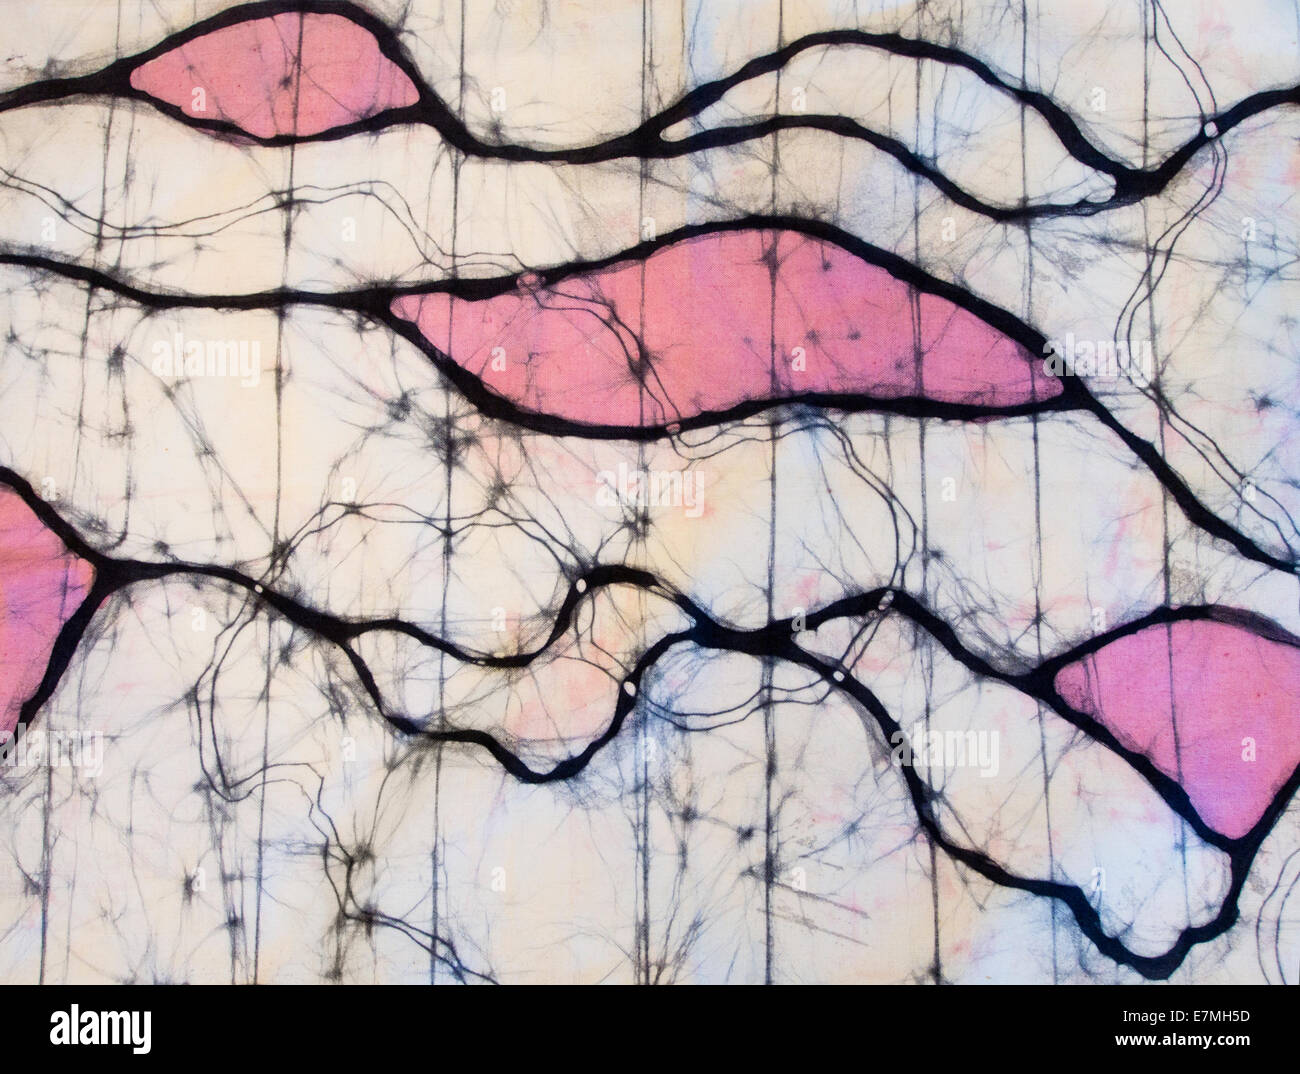 Partial close up of colourful wax batik artwork, abstract lines and irregular patches in black, pink and white Stock Photo